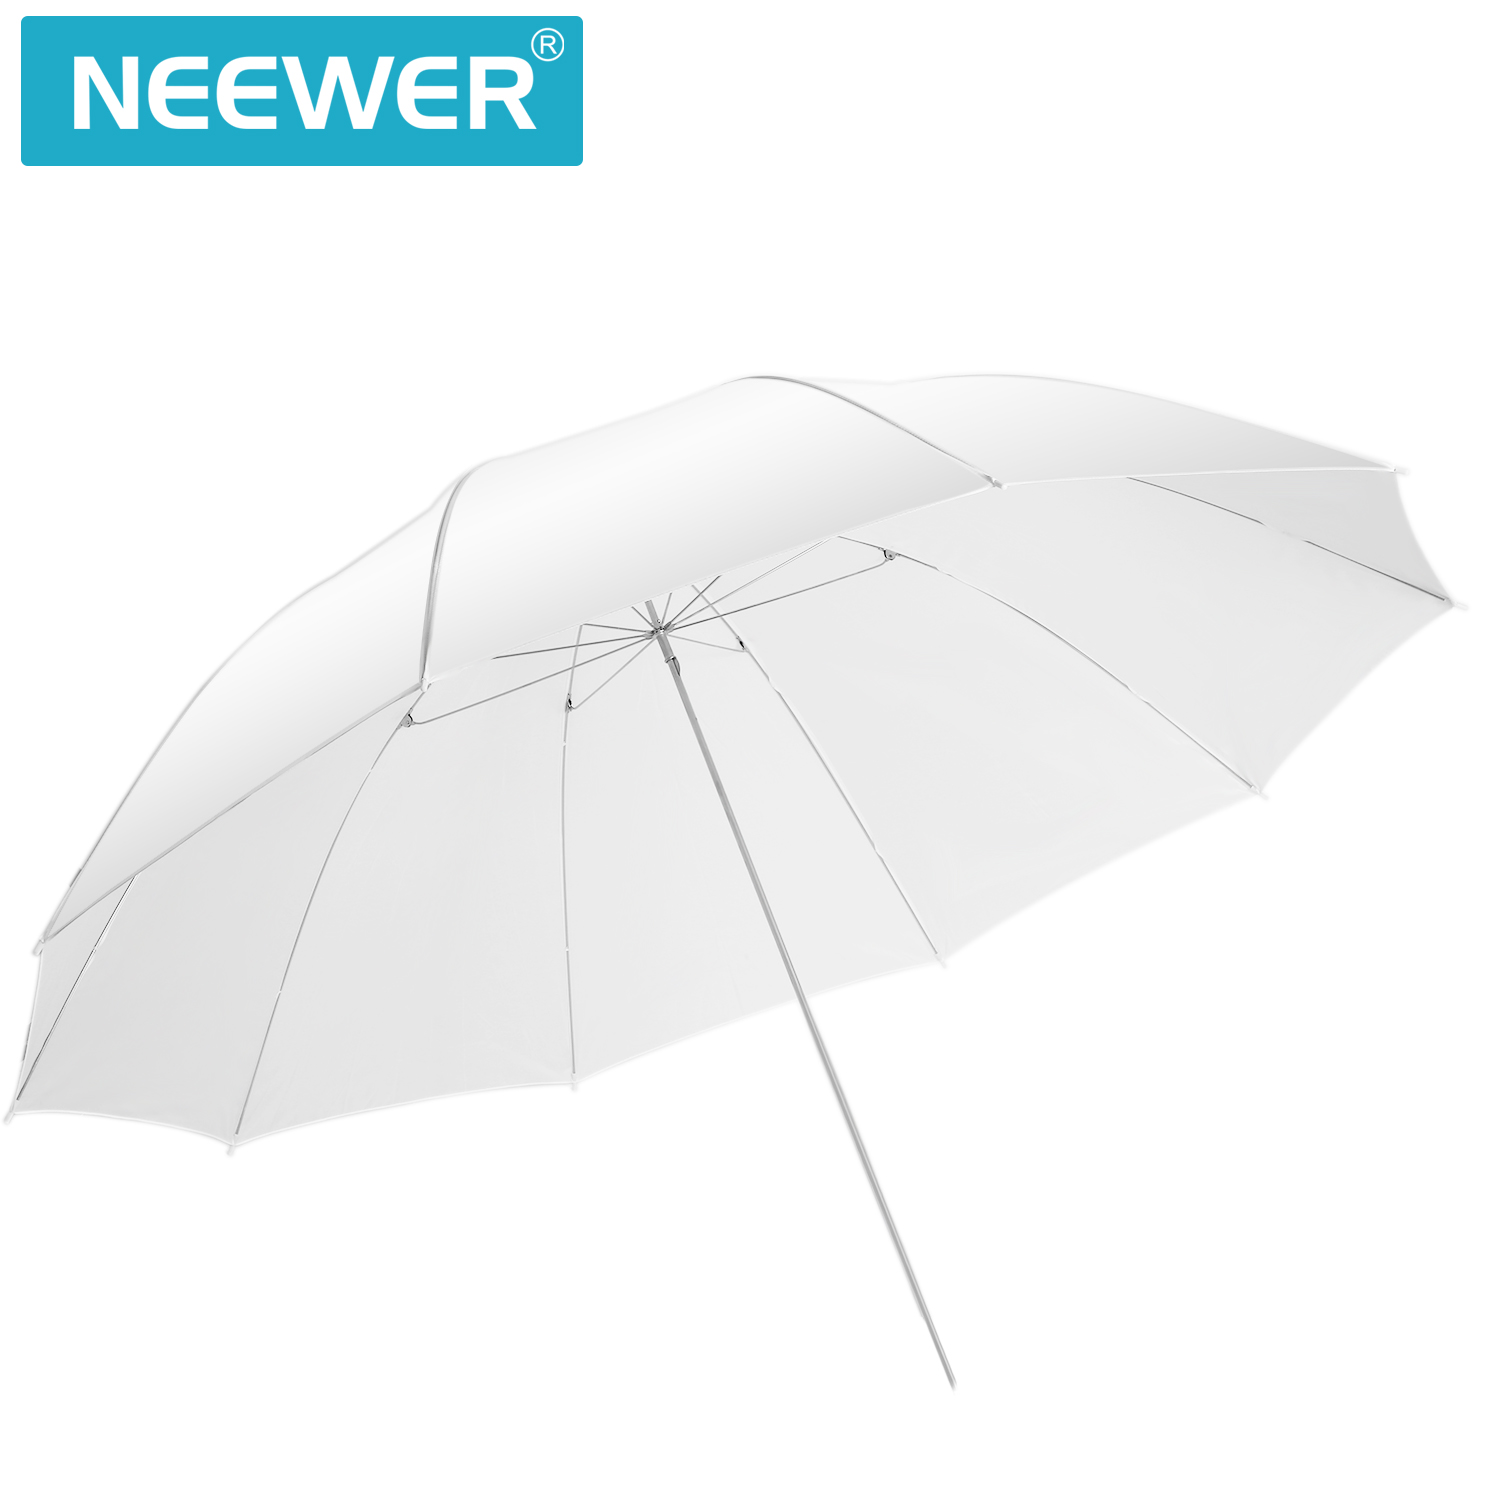 Neewer 60 inches Photography Studio Translucent Shoot Through White